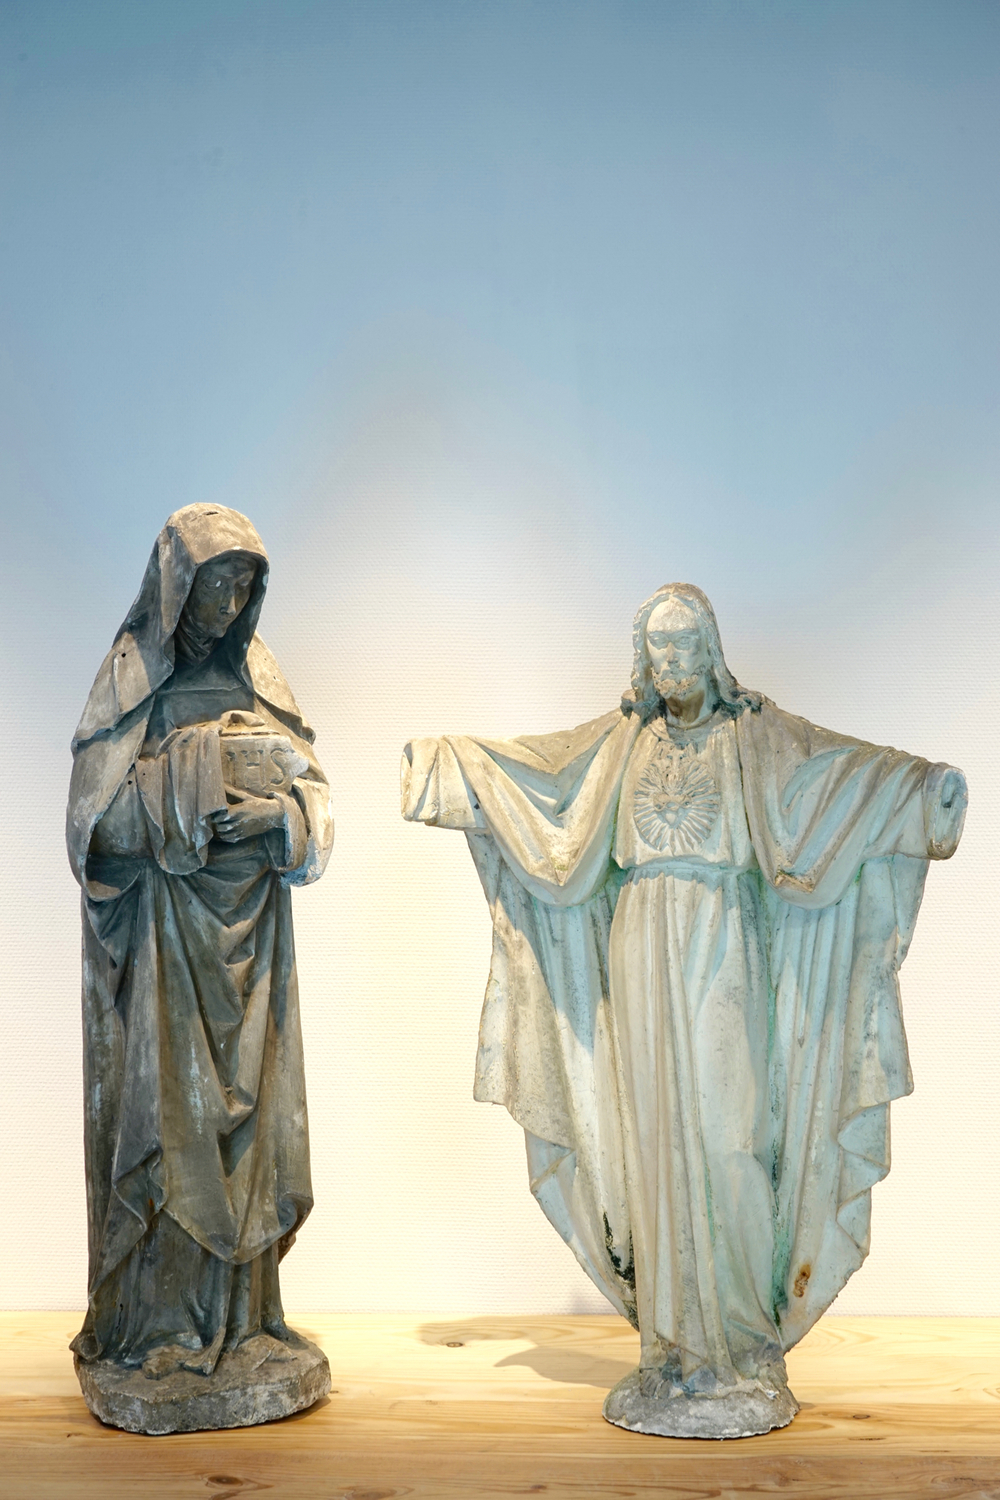 A set of two 100 cm plaster casts, one of a female saint and one of Christ, 19/20th C., Bruges